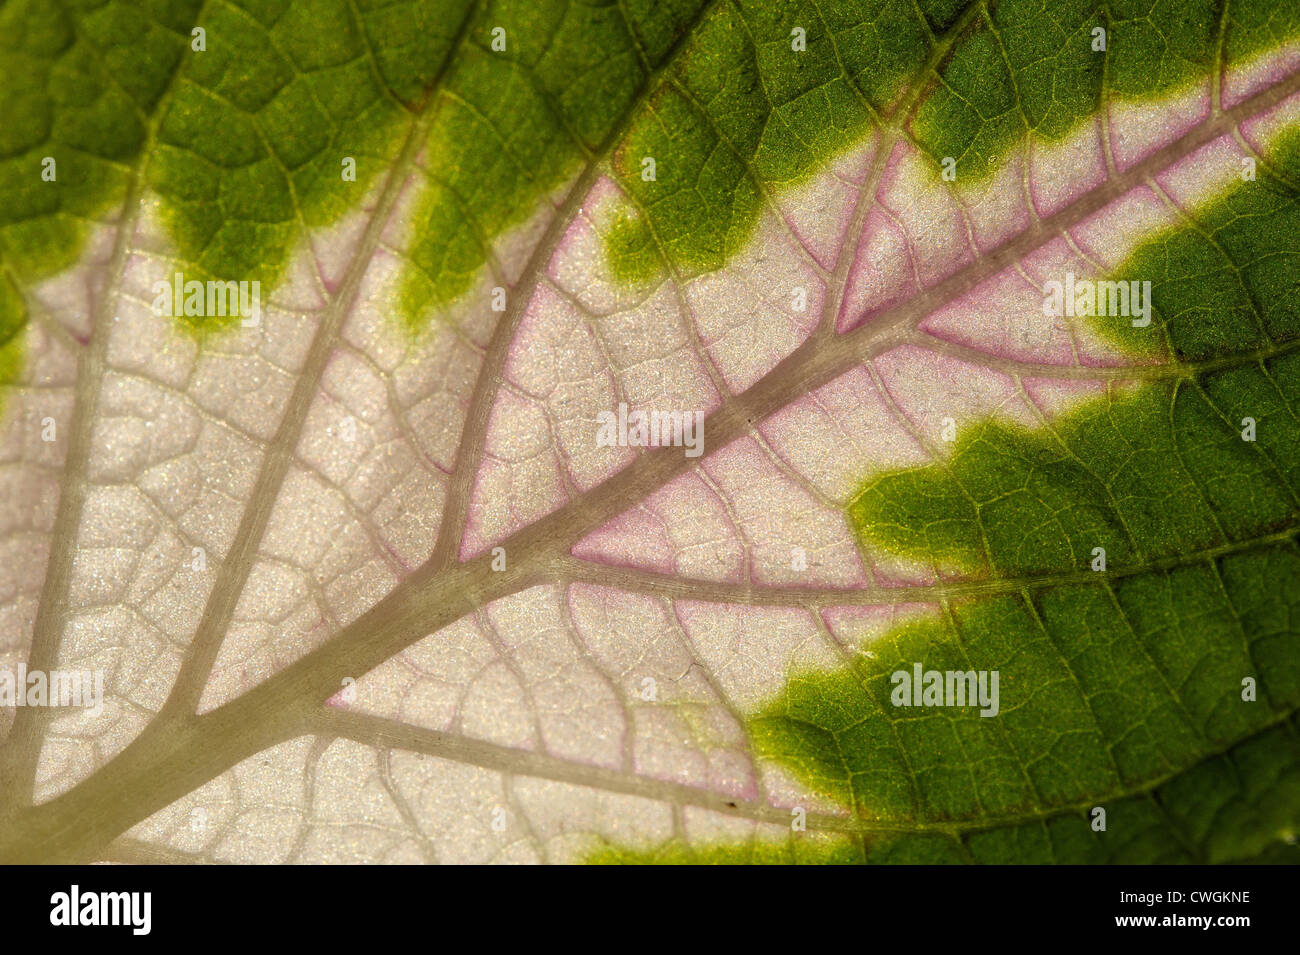 Leaf of coleus, plant that has mild relaxing and hallucinogenic effects Stock Photo